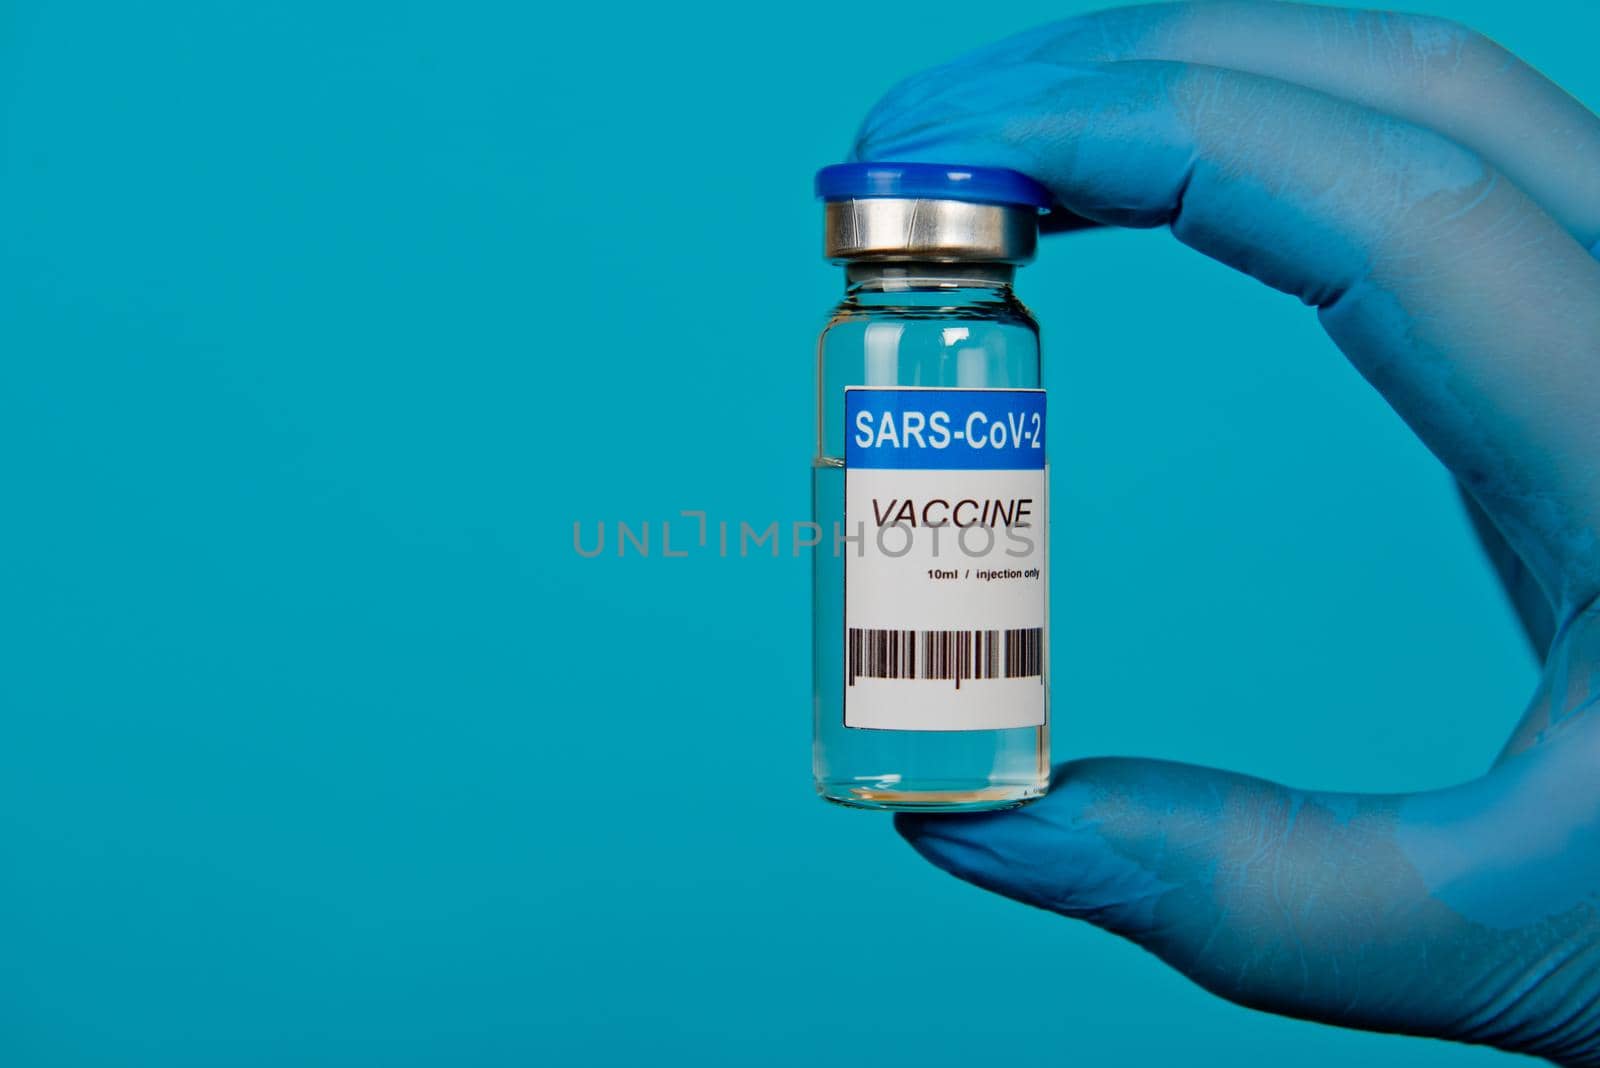 Hands in blue gloves holding vial of the Covid-19 coronavirus vaccine. Close-up.